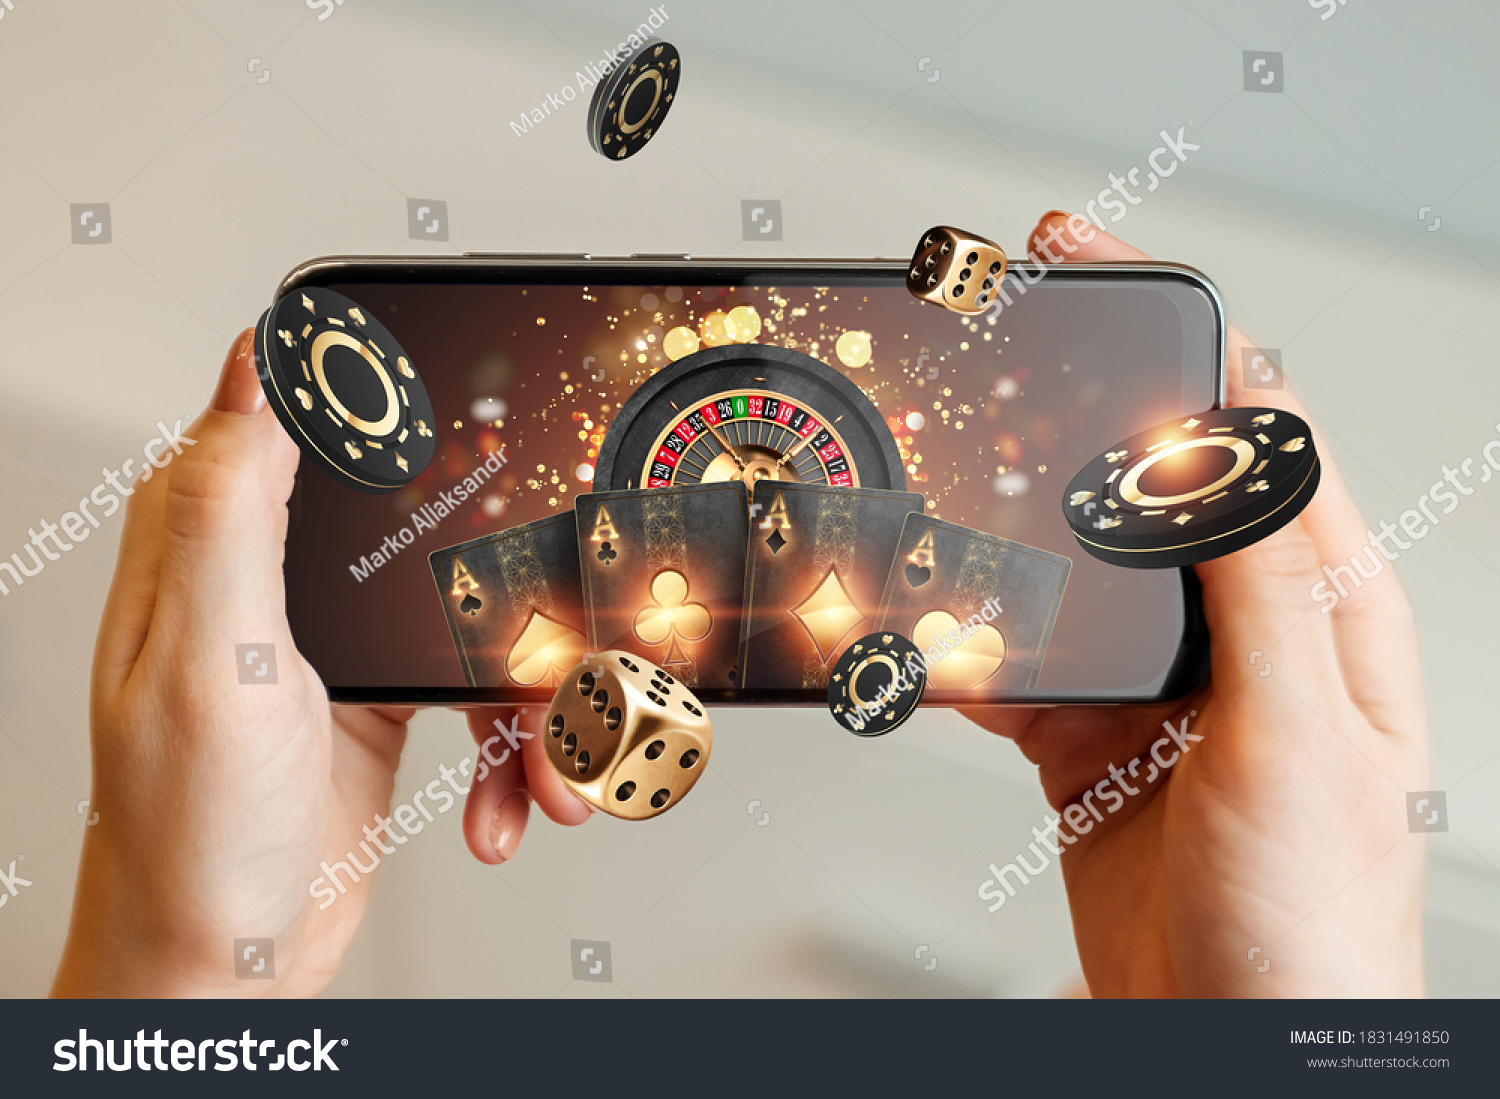 Creative background, online casino, in a man's hand a smartphone with playing cards, roulette and chips, black-gold background. Internet gambling concept. Copy space. #1831491850